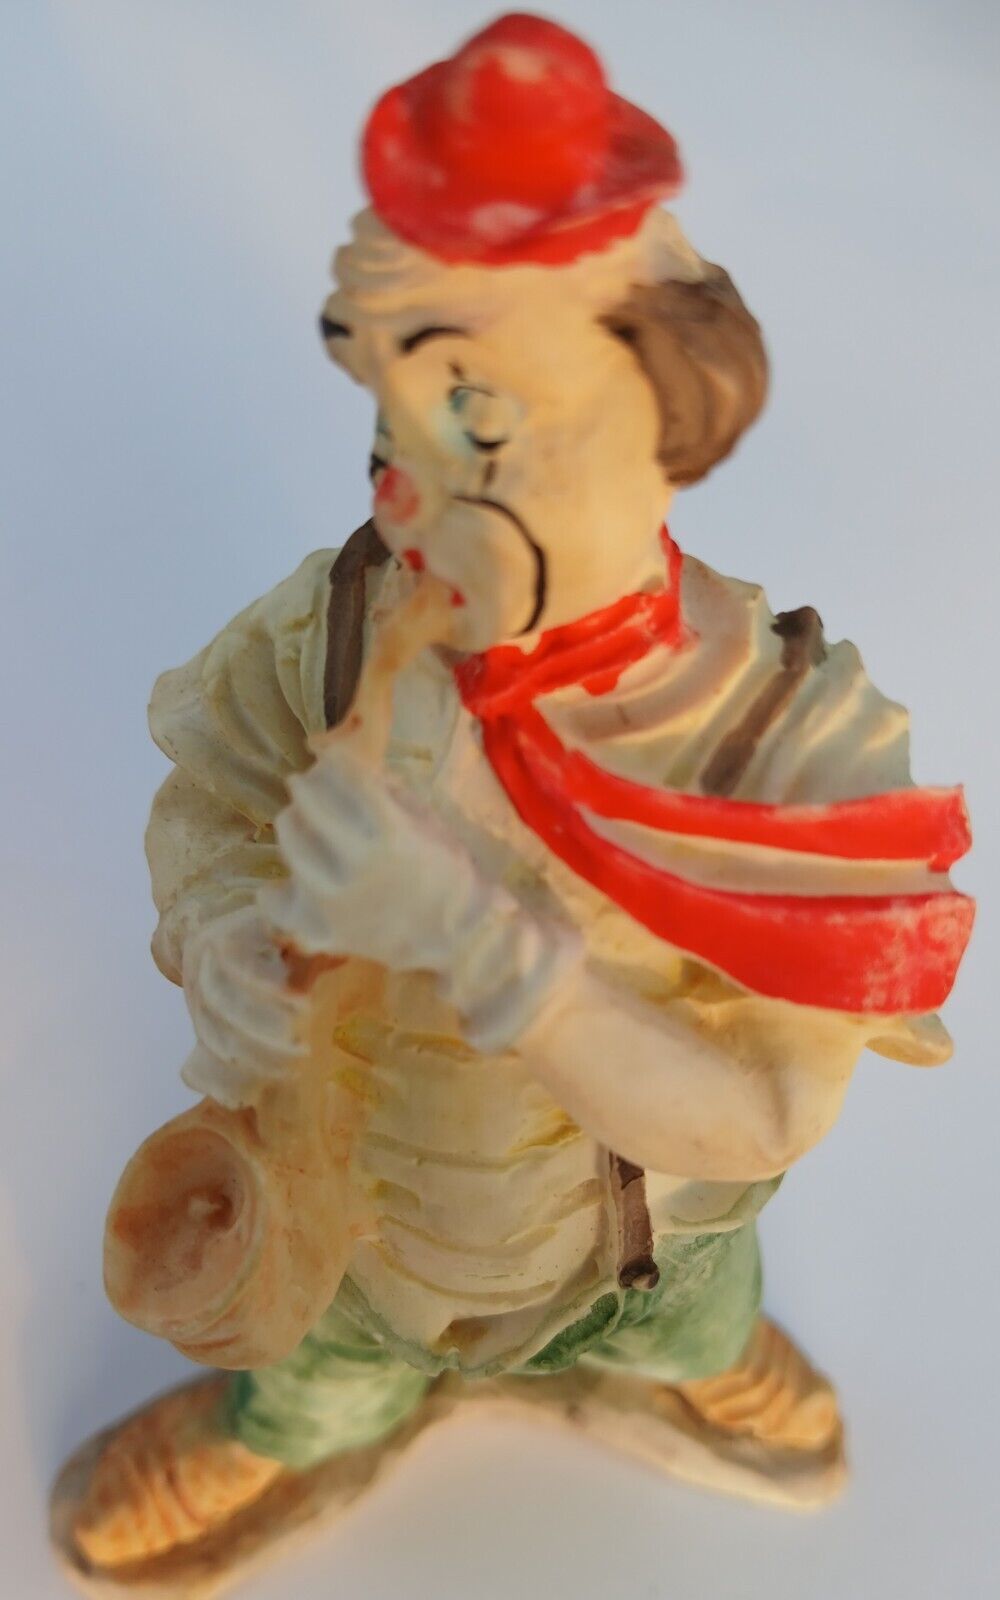  Clown Figurine with Red Hat and Saxophone (1986)